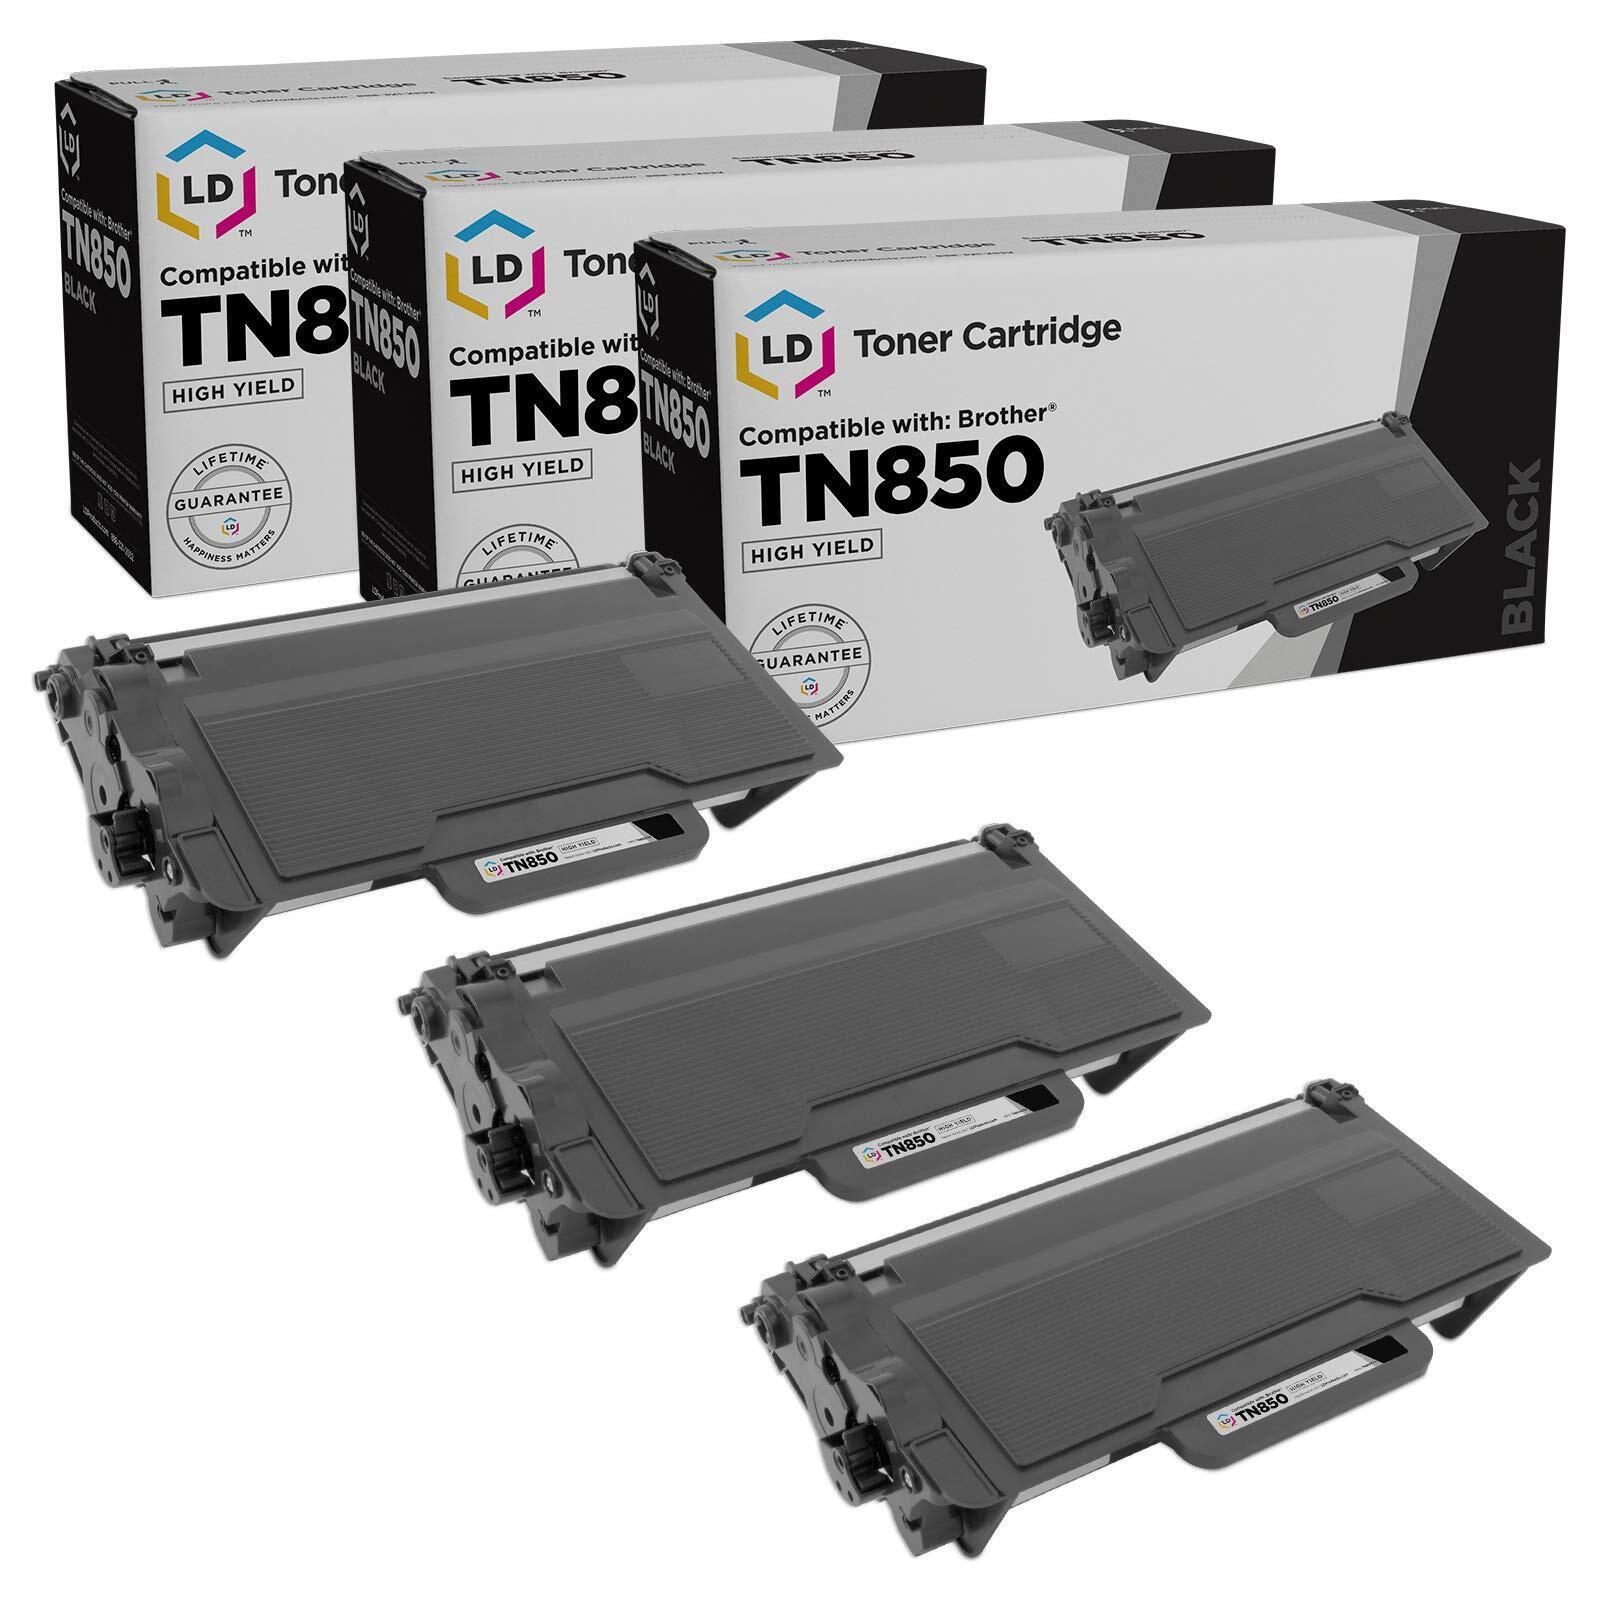 LD Compatible TN580 3PK High Yield Black Toner for Brother DCP-L5500DN DCP-L5600